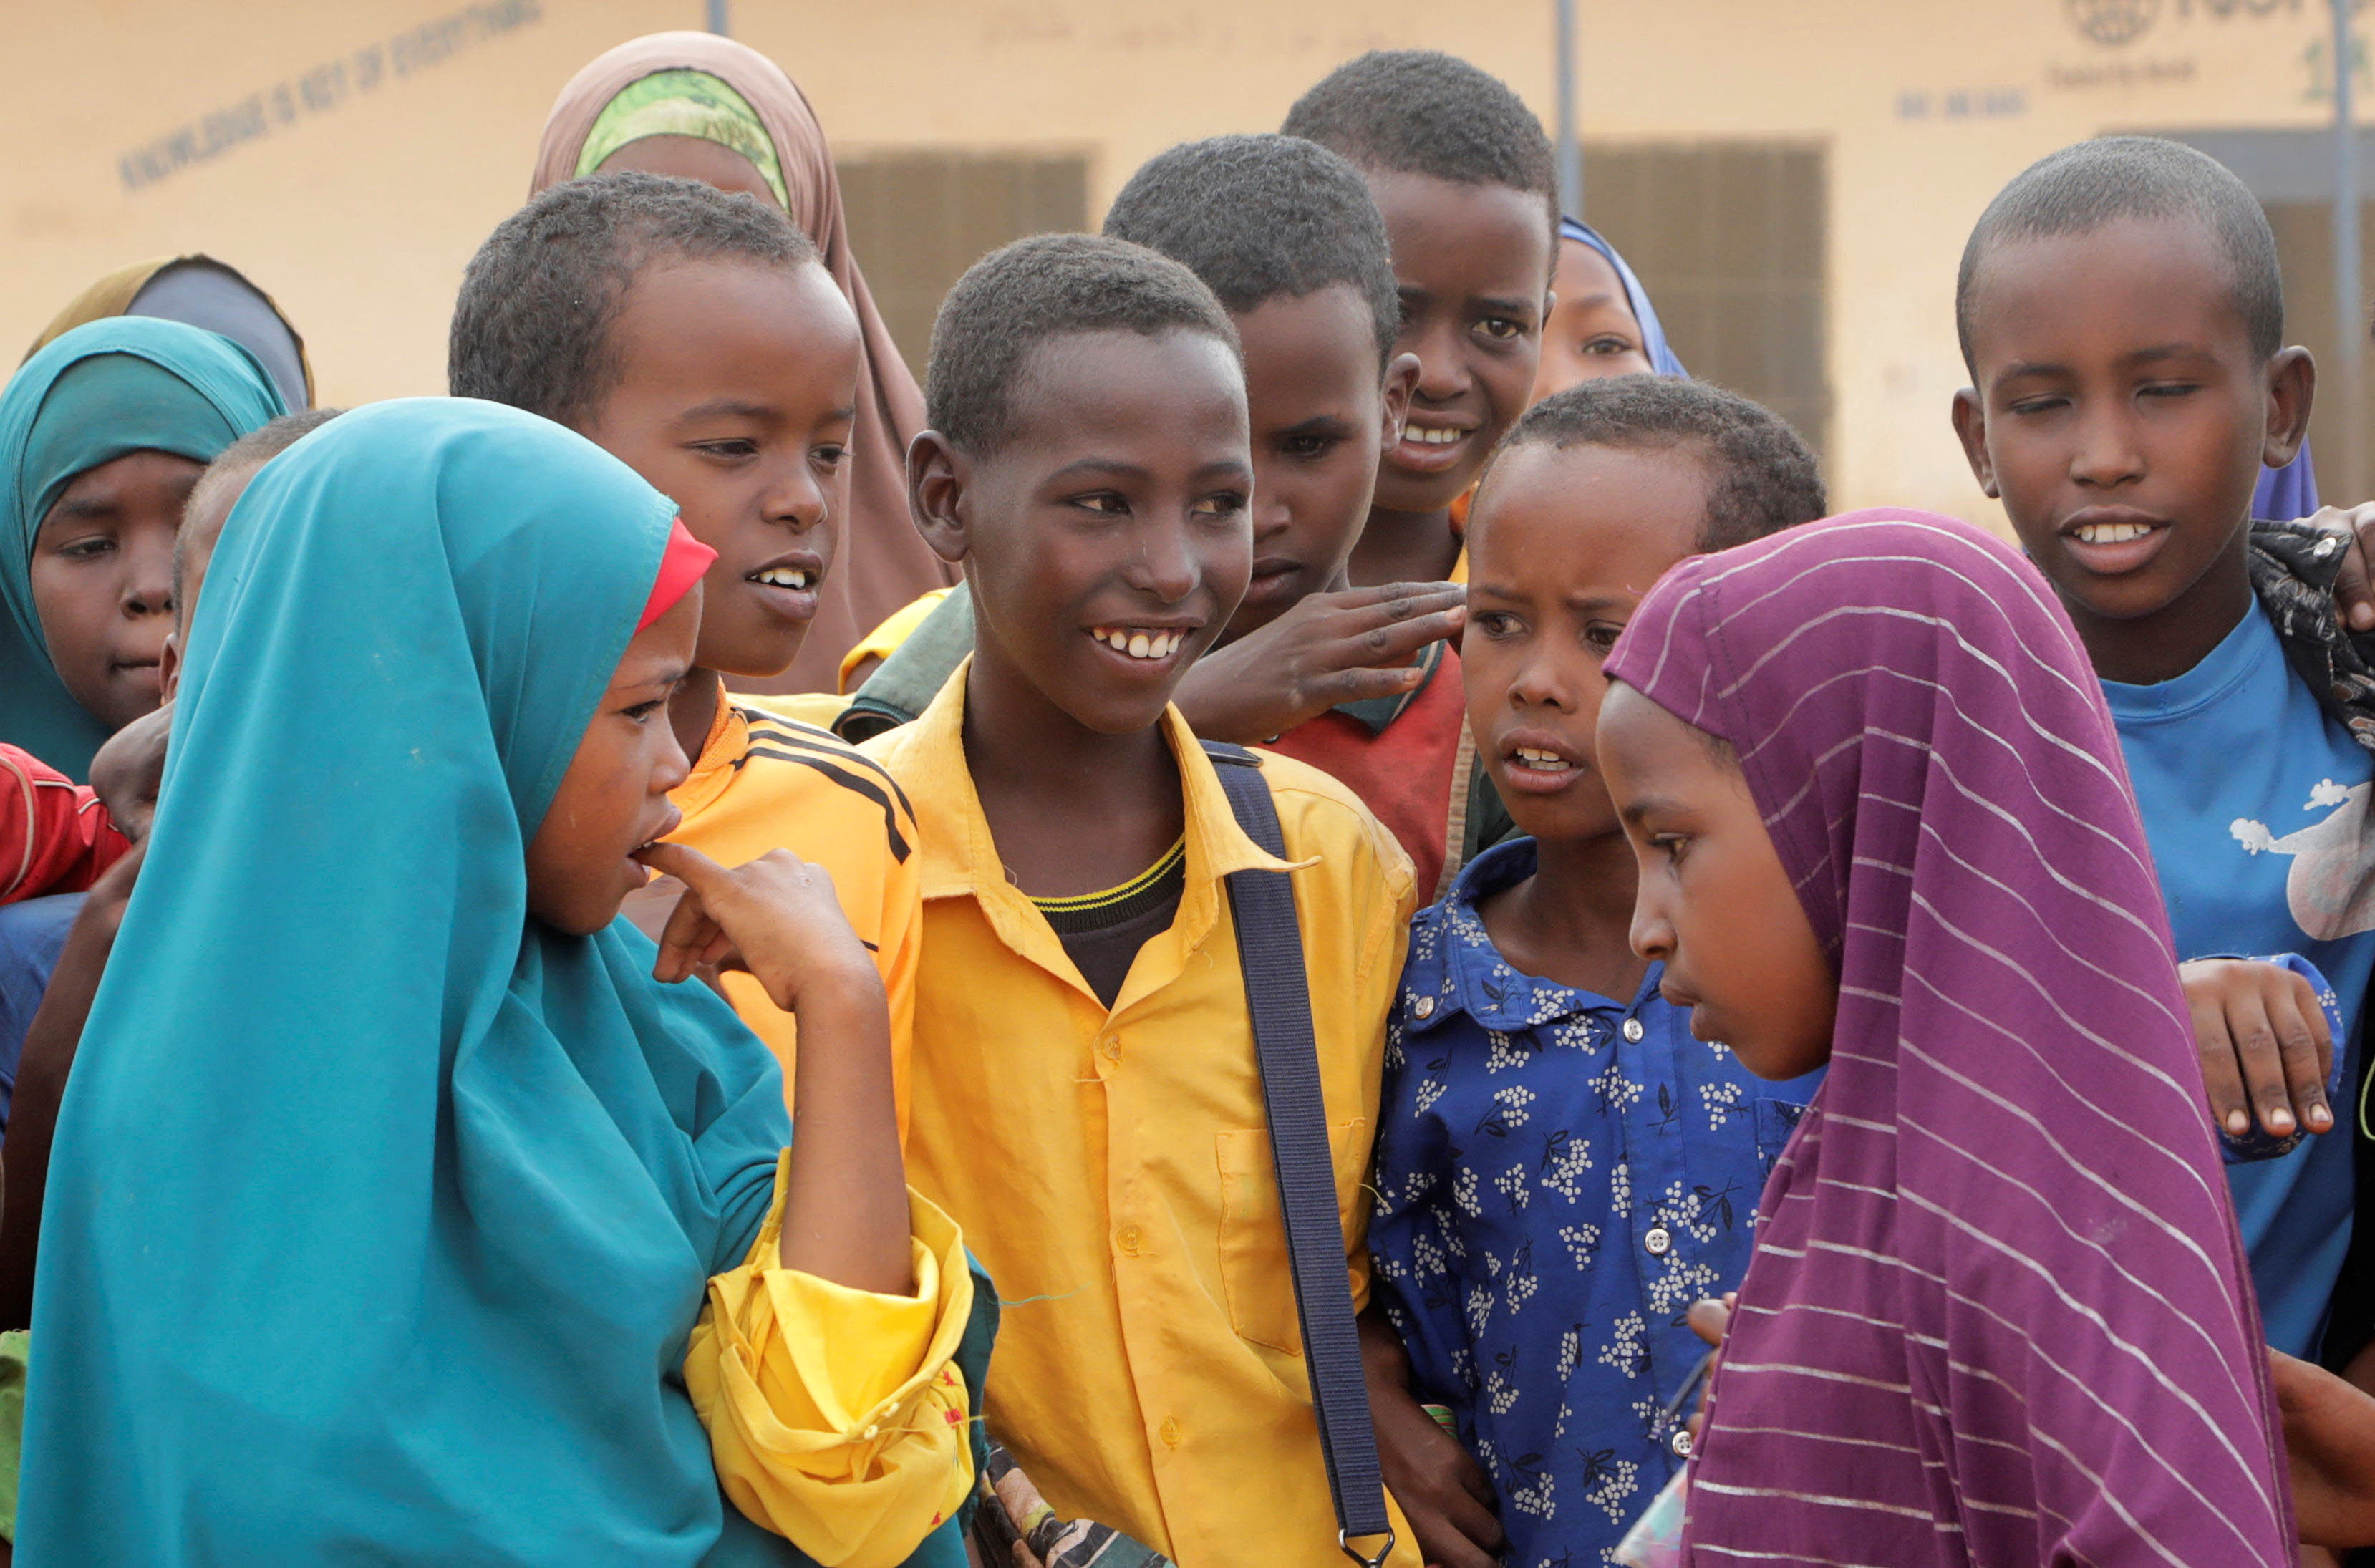 Kalmole Moalin Aden, 11, stands with classmates at the the Kabasa Primary School in Dollow